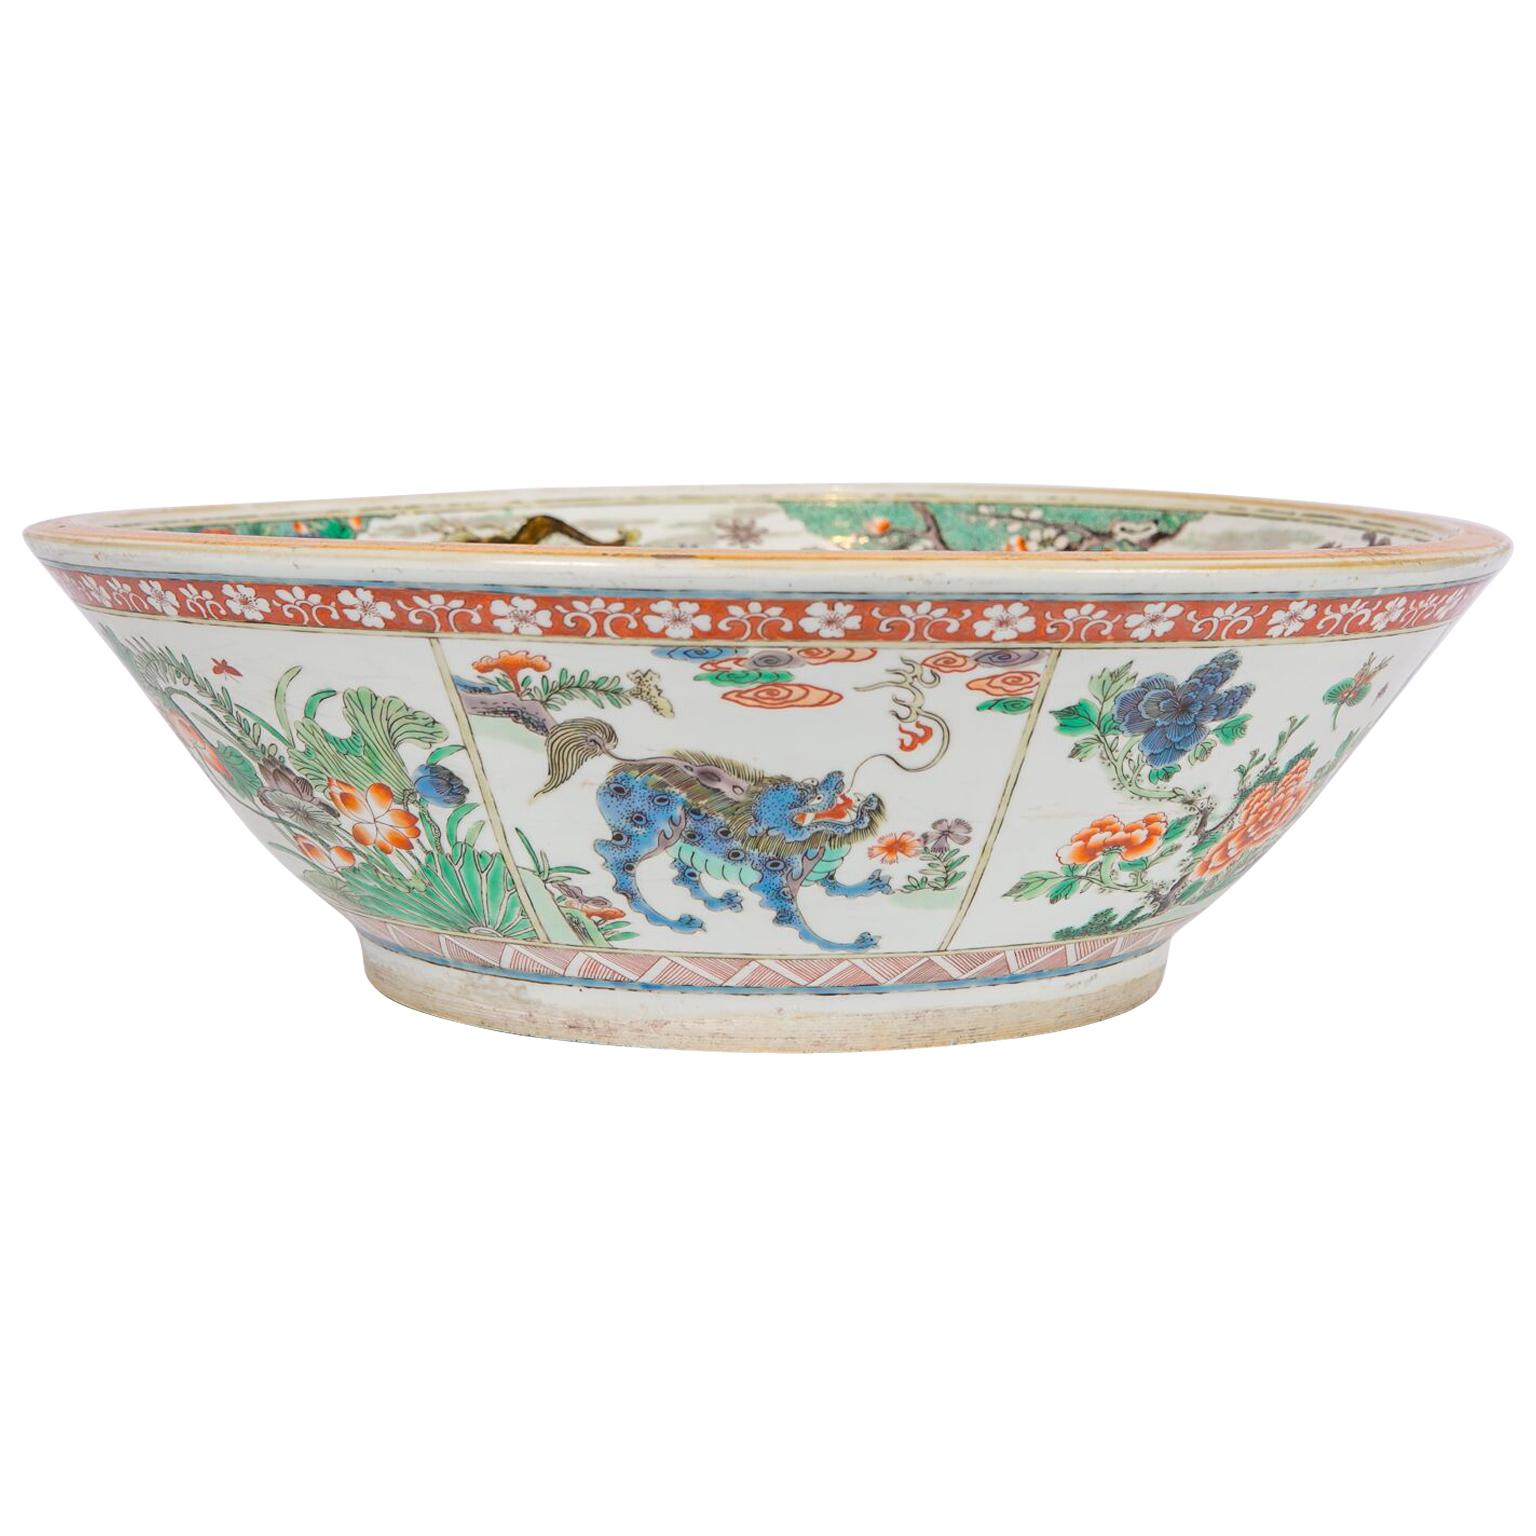 Large Antique Chinese Bowl Decorated in Famille Verte Enamels, Circa 1900